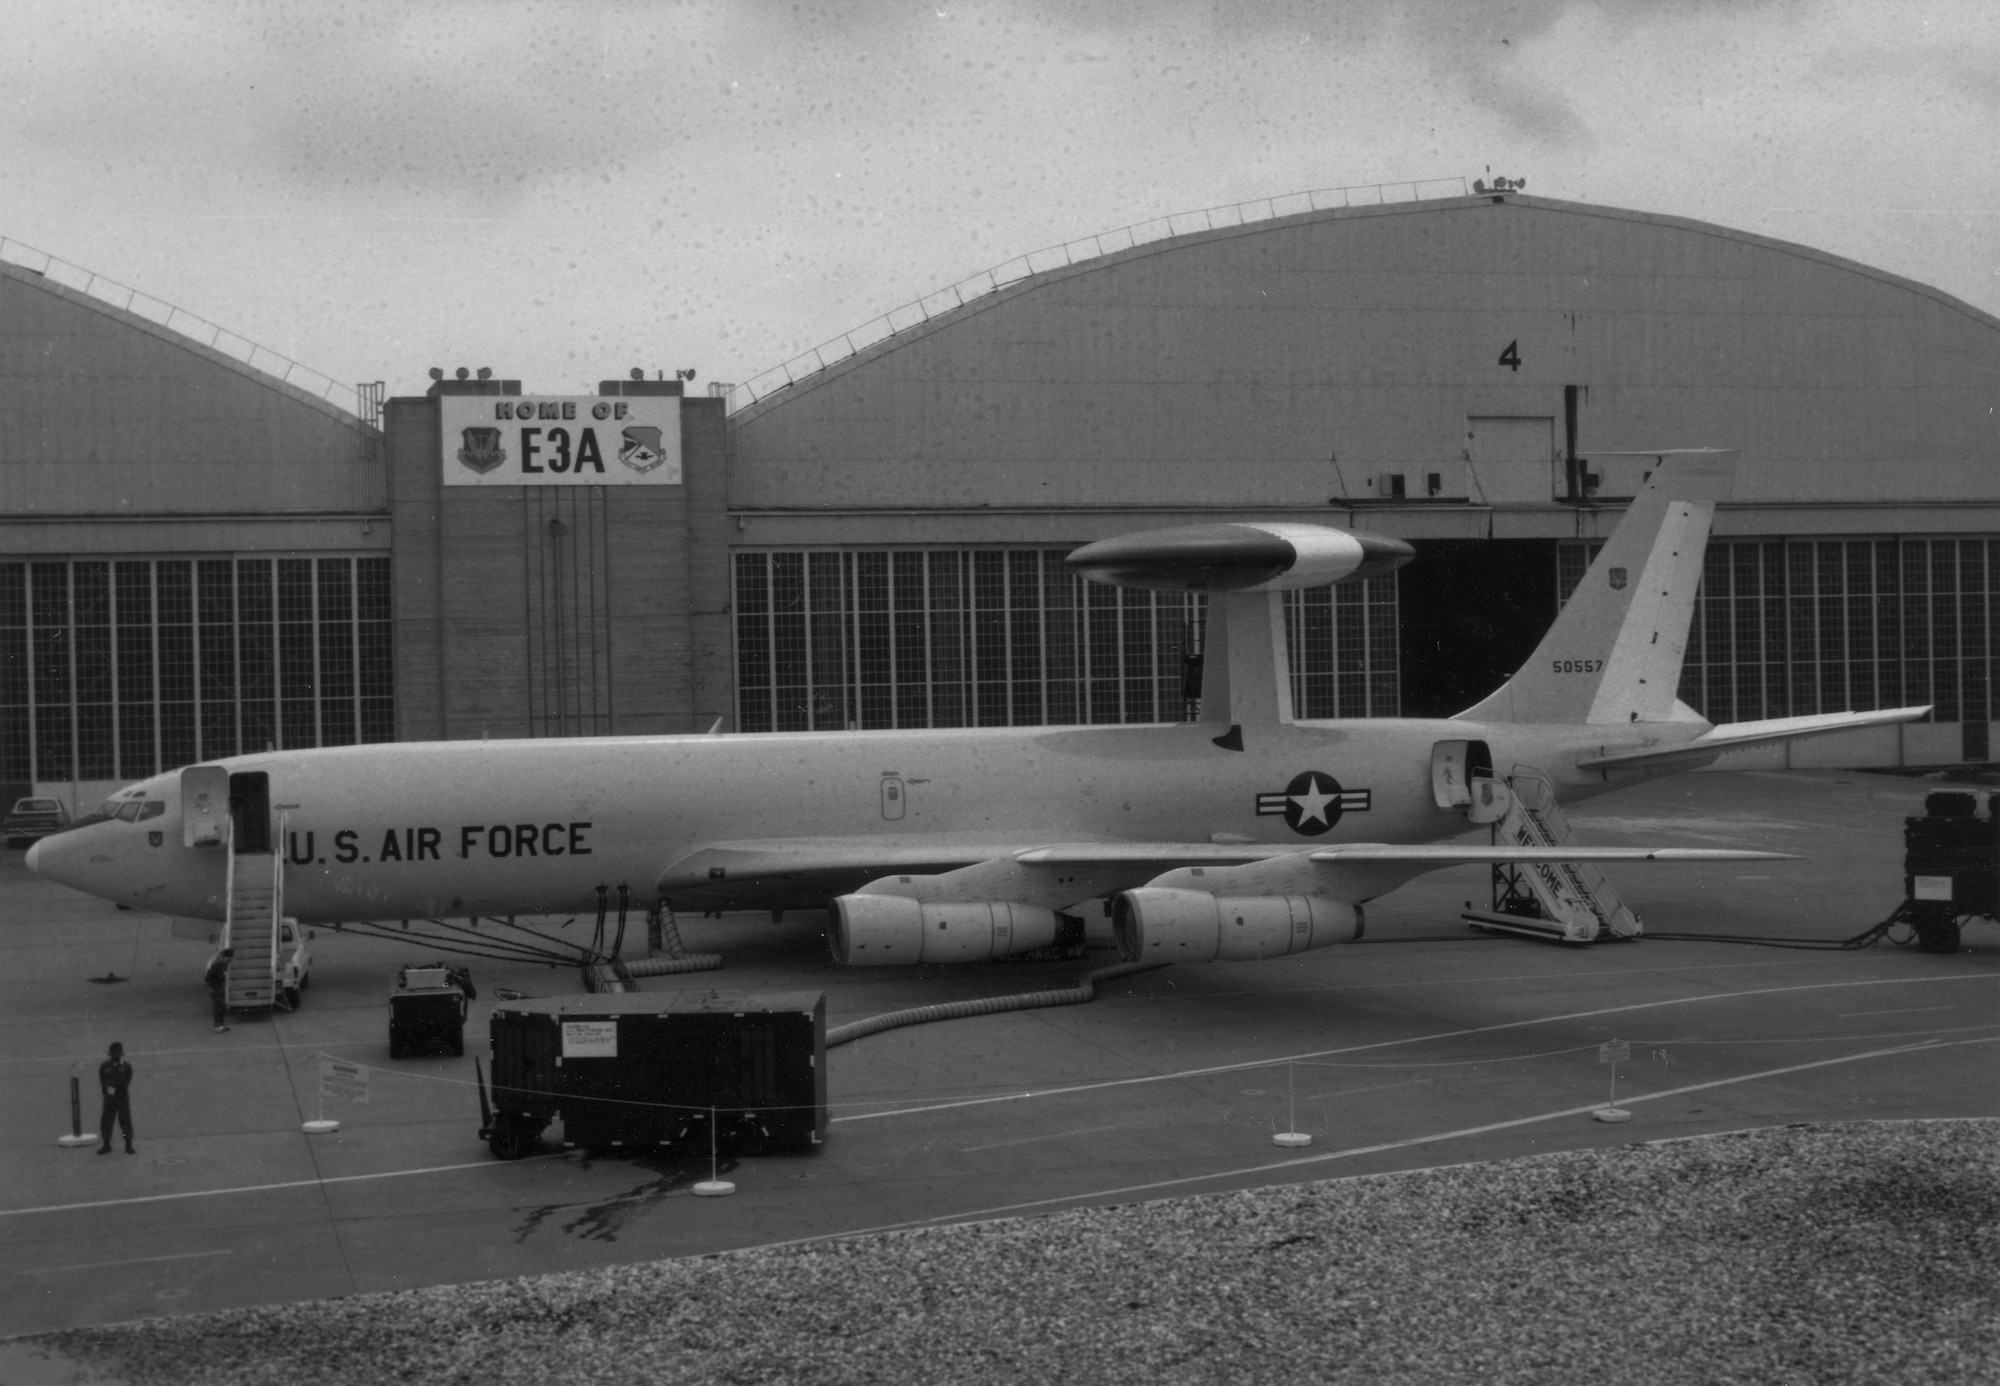 Tinker Air Force Base, the home of the E-3A, circa 1976-77.